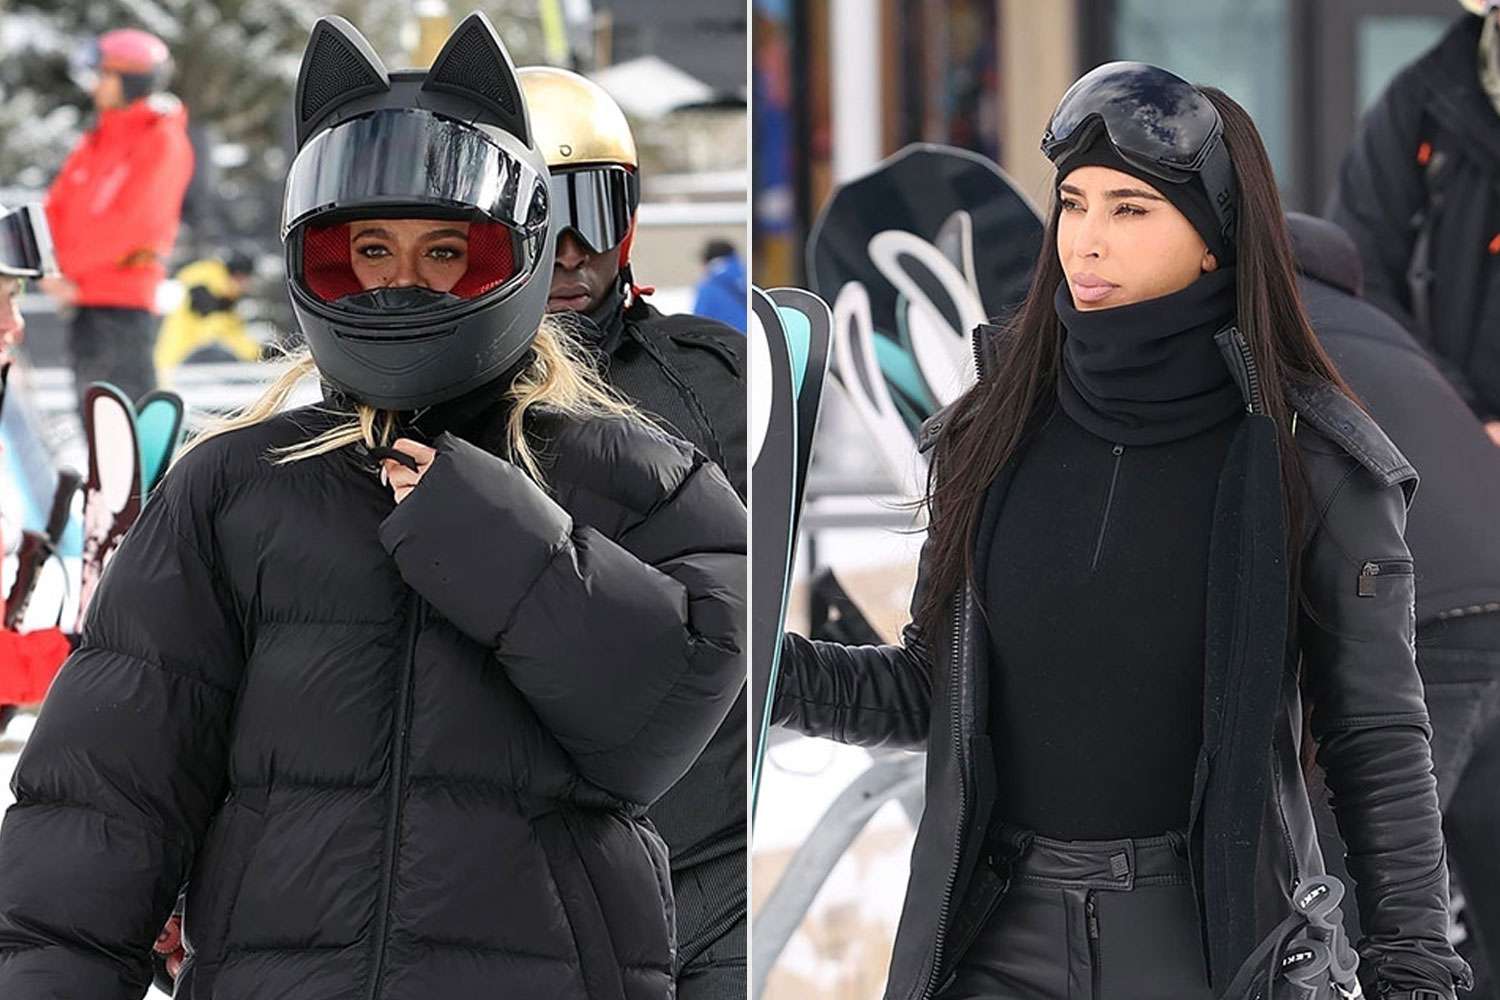 Kim, Kendall and Khloe bring A-LIST style to the slopes as they hit Buttermilk mountain in Aspen Kim was spotted in a full Chanel carrying her OWN skis as she prepared to hit the snow. Khloe meanwhile sported Balenciaga with a ADORABLE CAT EAR helmet as the sisters spent a days skiing with Corey and Kris.